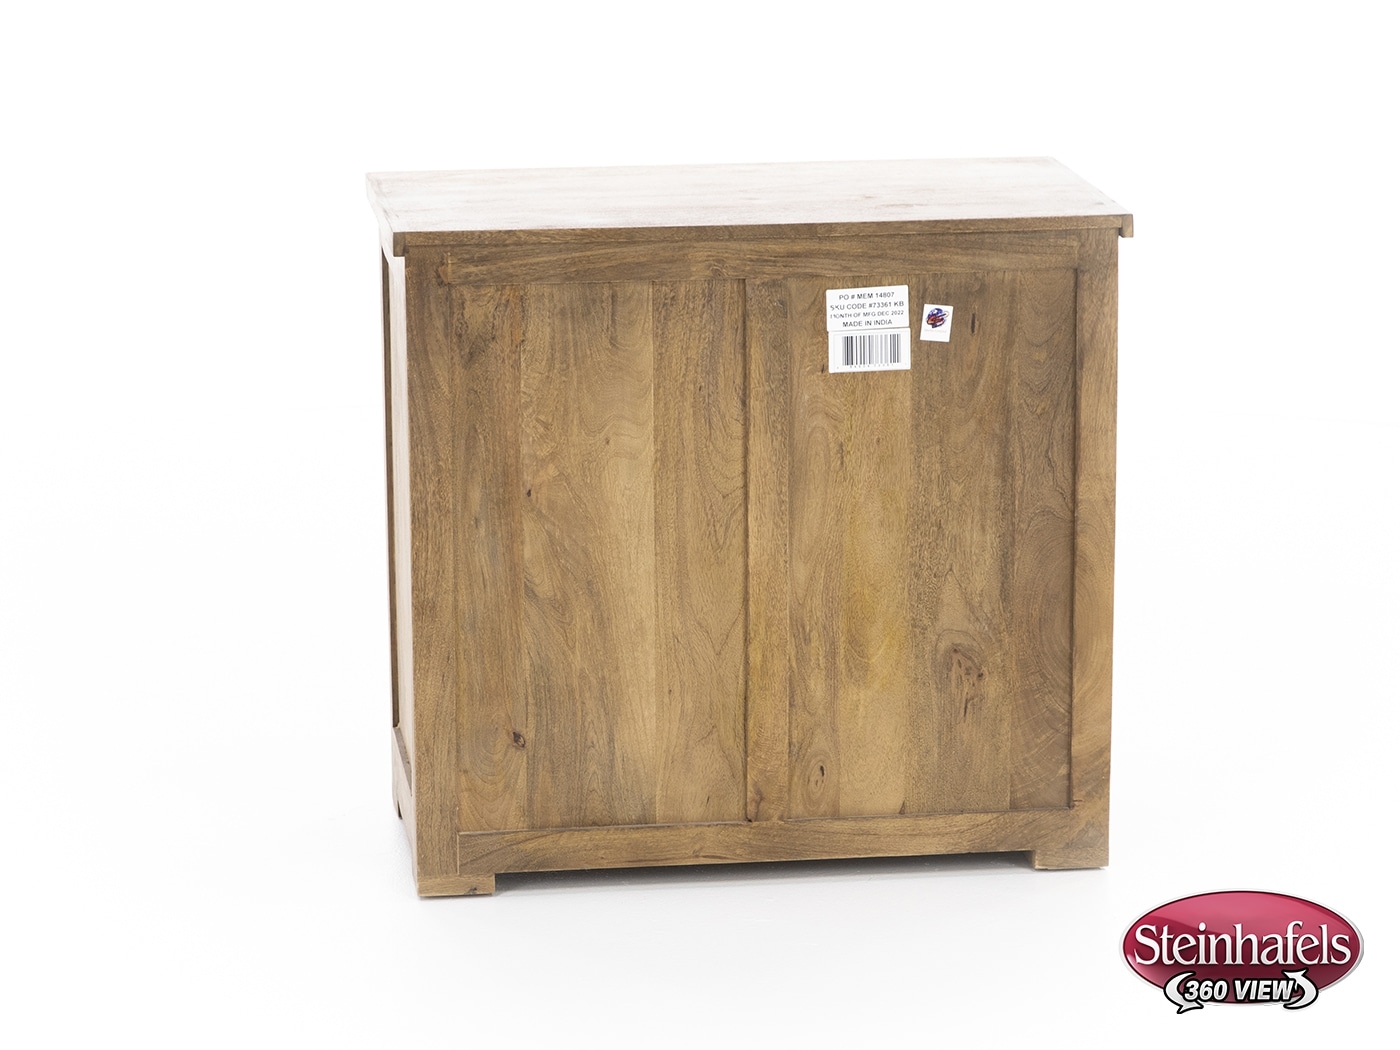 ctoc brown chests cabinets  image iron  